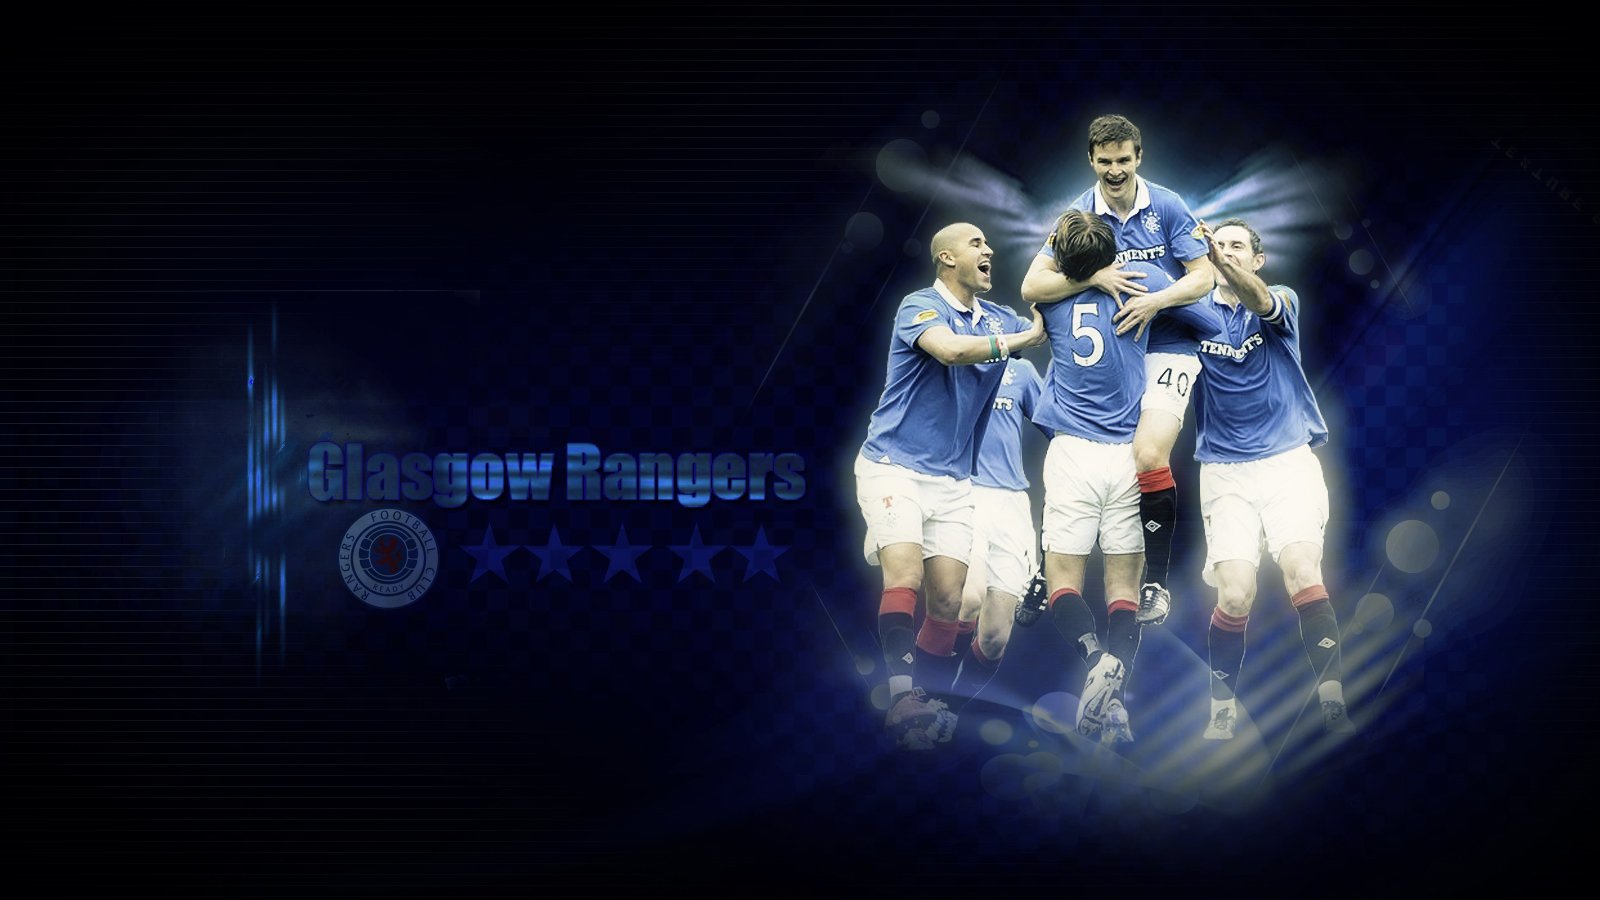 Glasgow Rangers Wallapper wallpaper Football Pictures and Photos